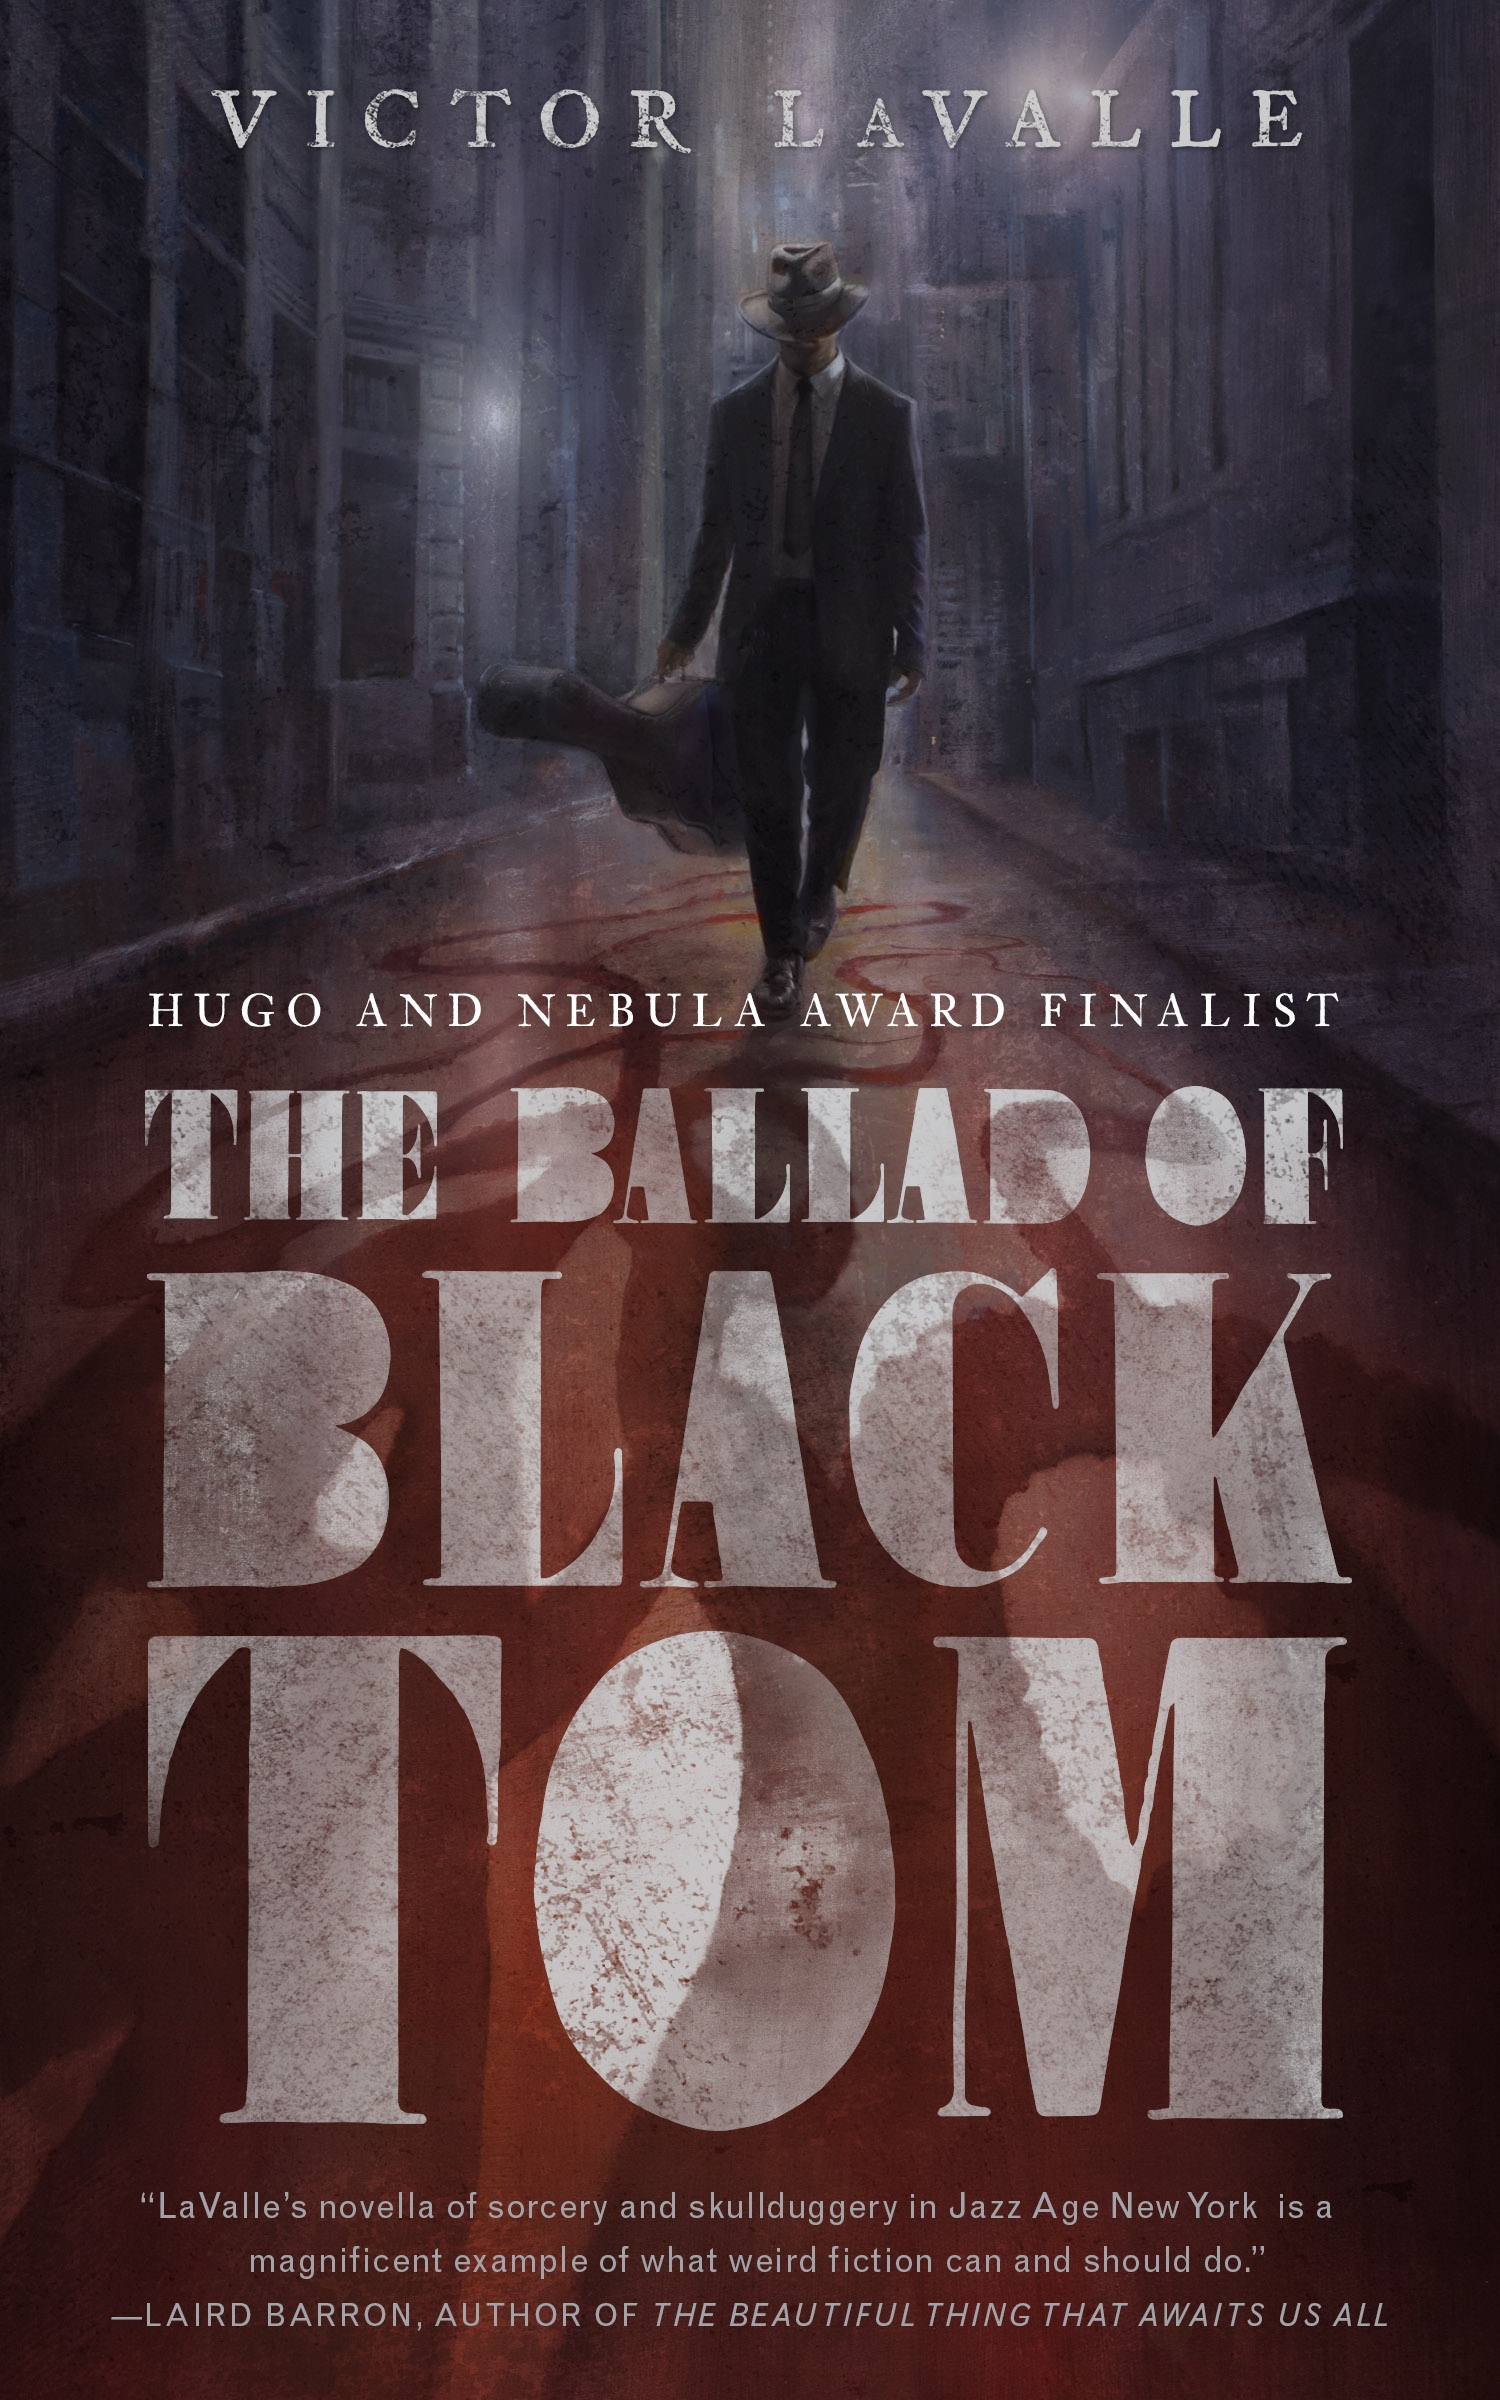 The Ballad of Black Tom Victor LaValle